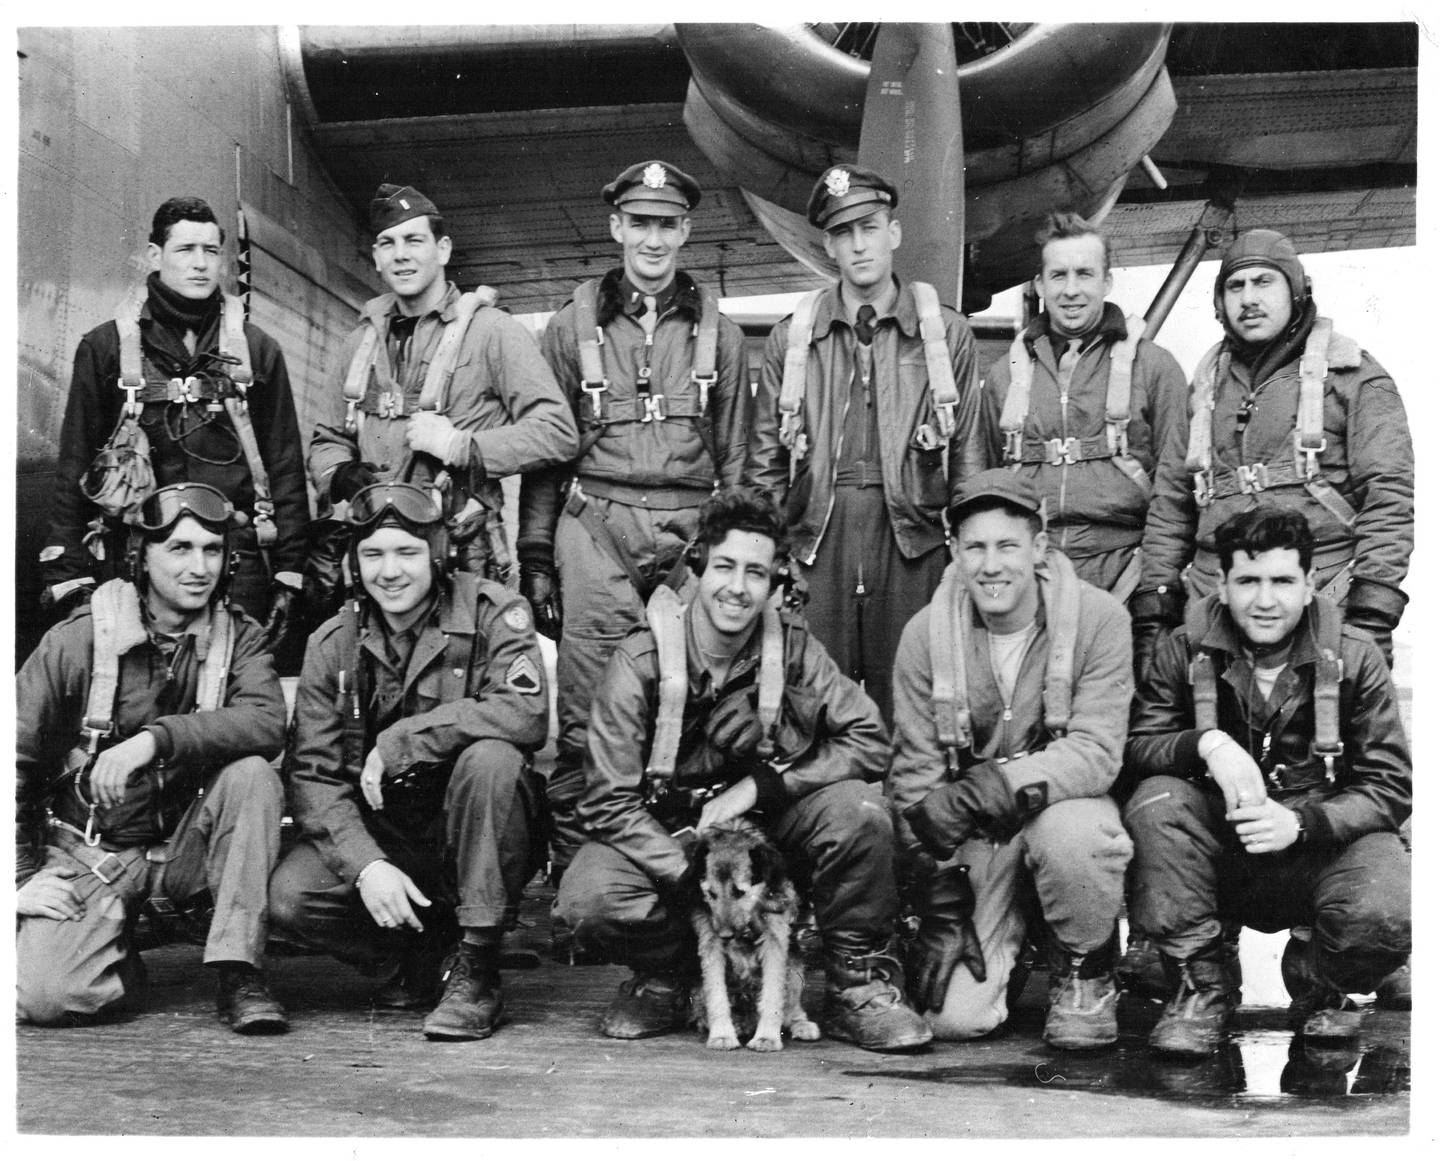 The Farrington crew served during World War II in the Second Air Division 466th Bomb Group at the Attlebridge Army Airforce base. Photo taken March 26, 1945. Nine members of 11 of this crew, including waist gunner Robert E. Peterson Sr. (front row, first person), died April 21, 1945 after being shot down by enemy fire flying near Regensburg, Germany.